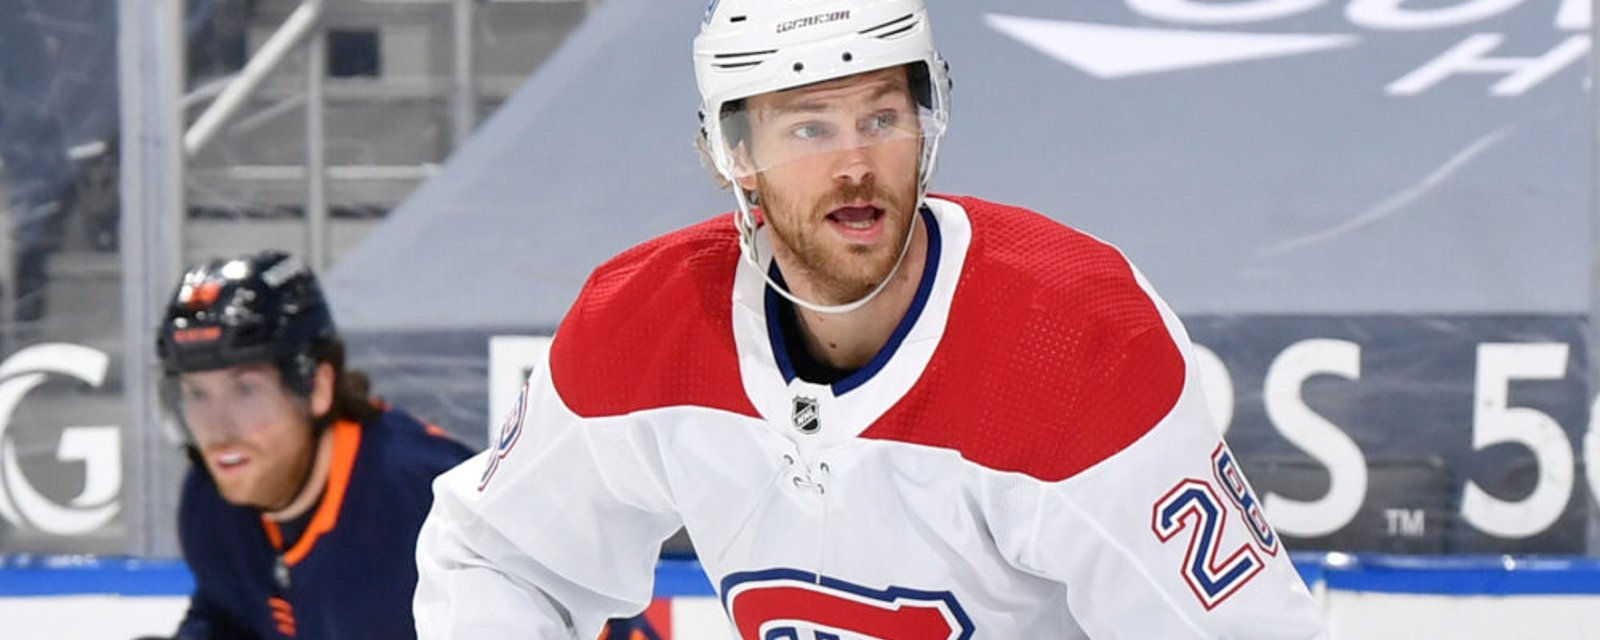 Yet another Habs player bails, Merrill signs a free agent deal elsewhere